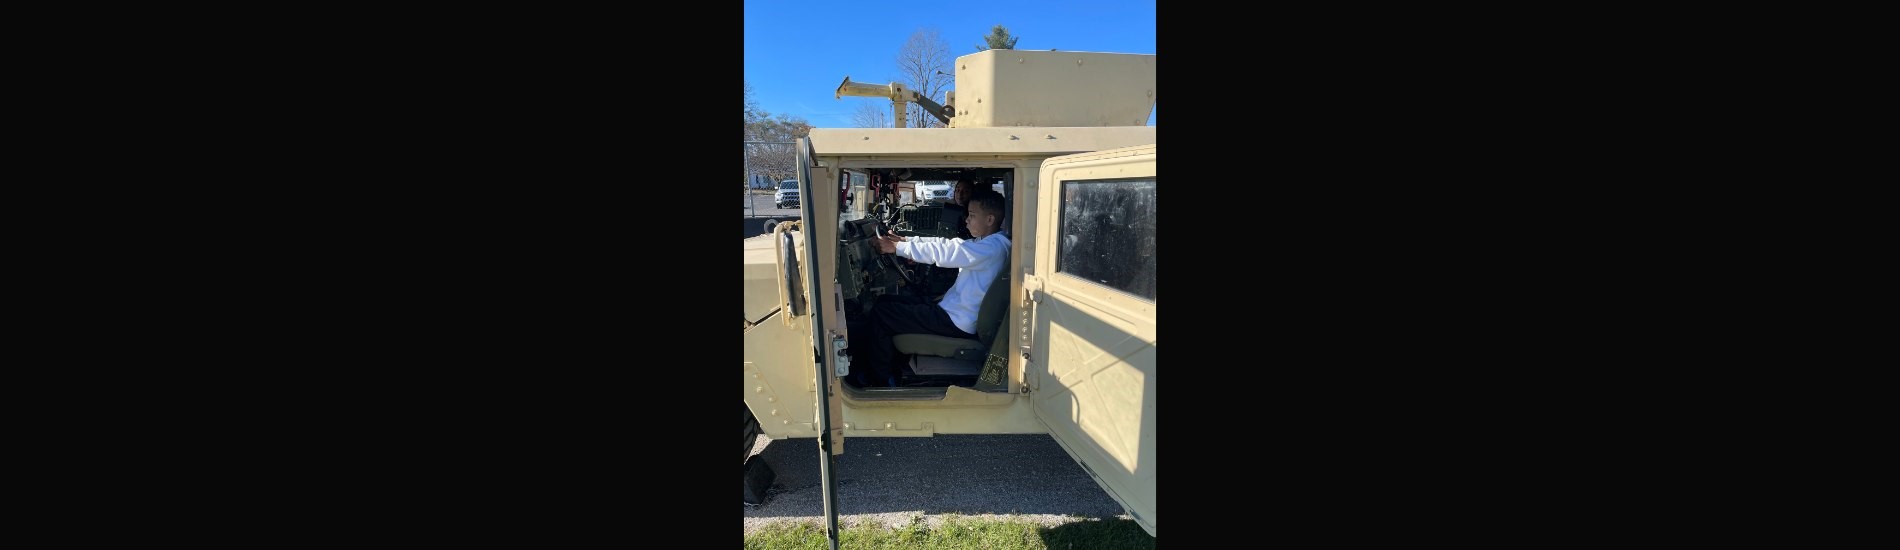 8th grader Ethan T. in the Arsenal humvee